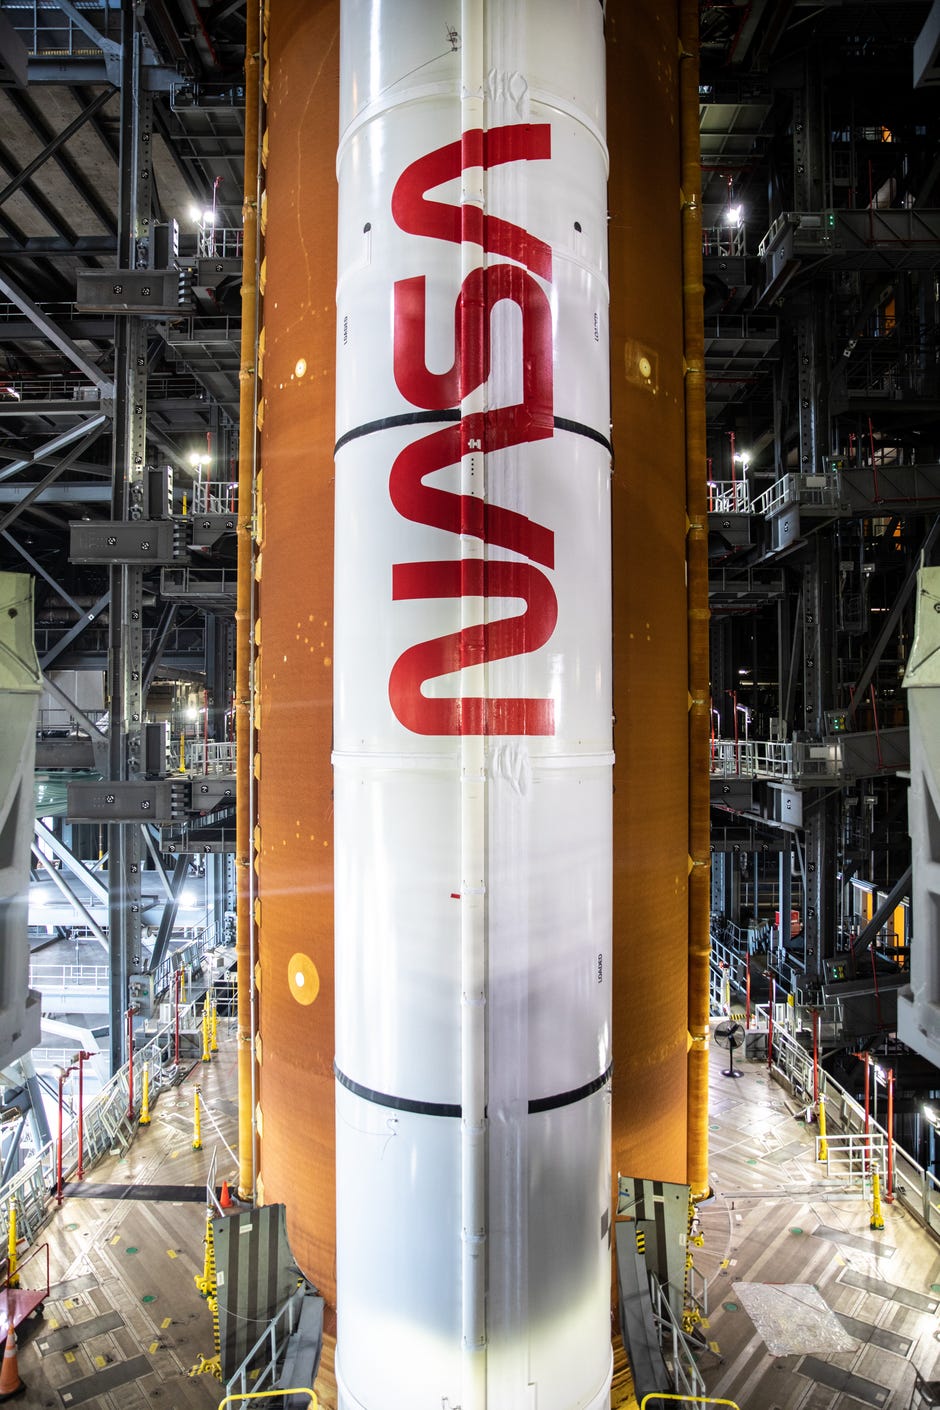 Artemis' SLS boosters with the NASA logo clearly shown.